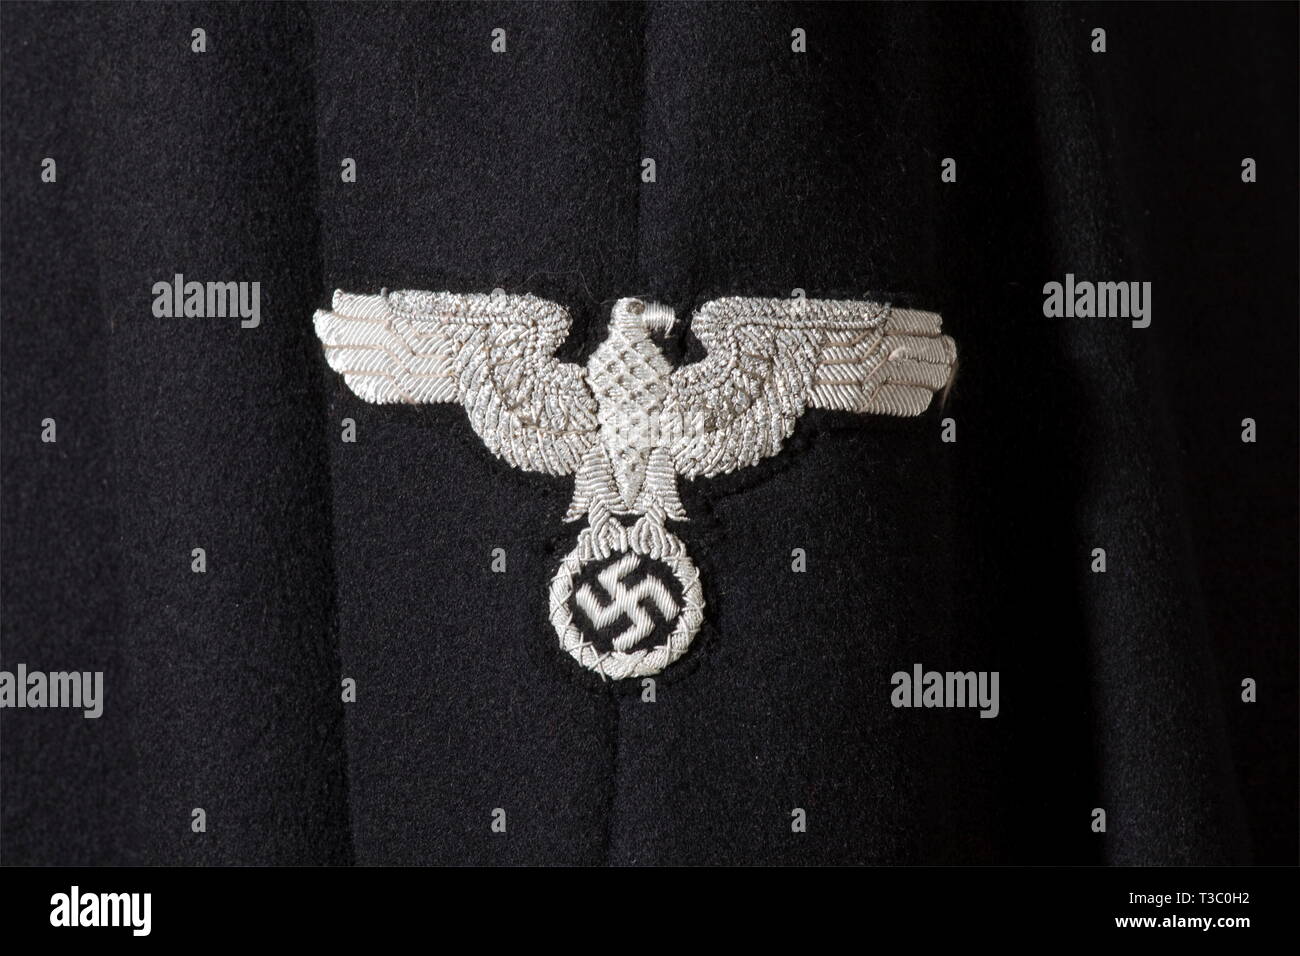 A cloak to the black uniform, for SS-leaders Cloak of black woolen material with hidden button facing and silver collar cord, in the black liner a tailor's tag 'Nic Reuter - Düsseldorf - Königsallee 64', in the interior pocket a wearer's label. Aluminium clasp with chain, the buttons with applied SS eagles. Silver-embroidered sleeve eagle. Of extreme rareness. historic, historical, 1930s, 1930s, 20th century, Waffen-SS, armed division of the SS, armed service, armed services, NS, National Socialism, Nazism, Third Reich, German Reich, Germany, military, militaria, utensil, p, Editorial-Use-Only Stock Photo